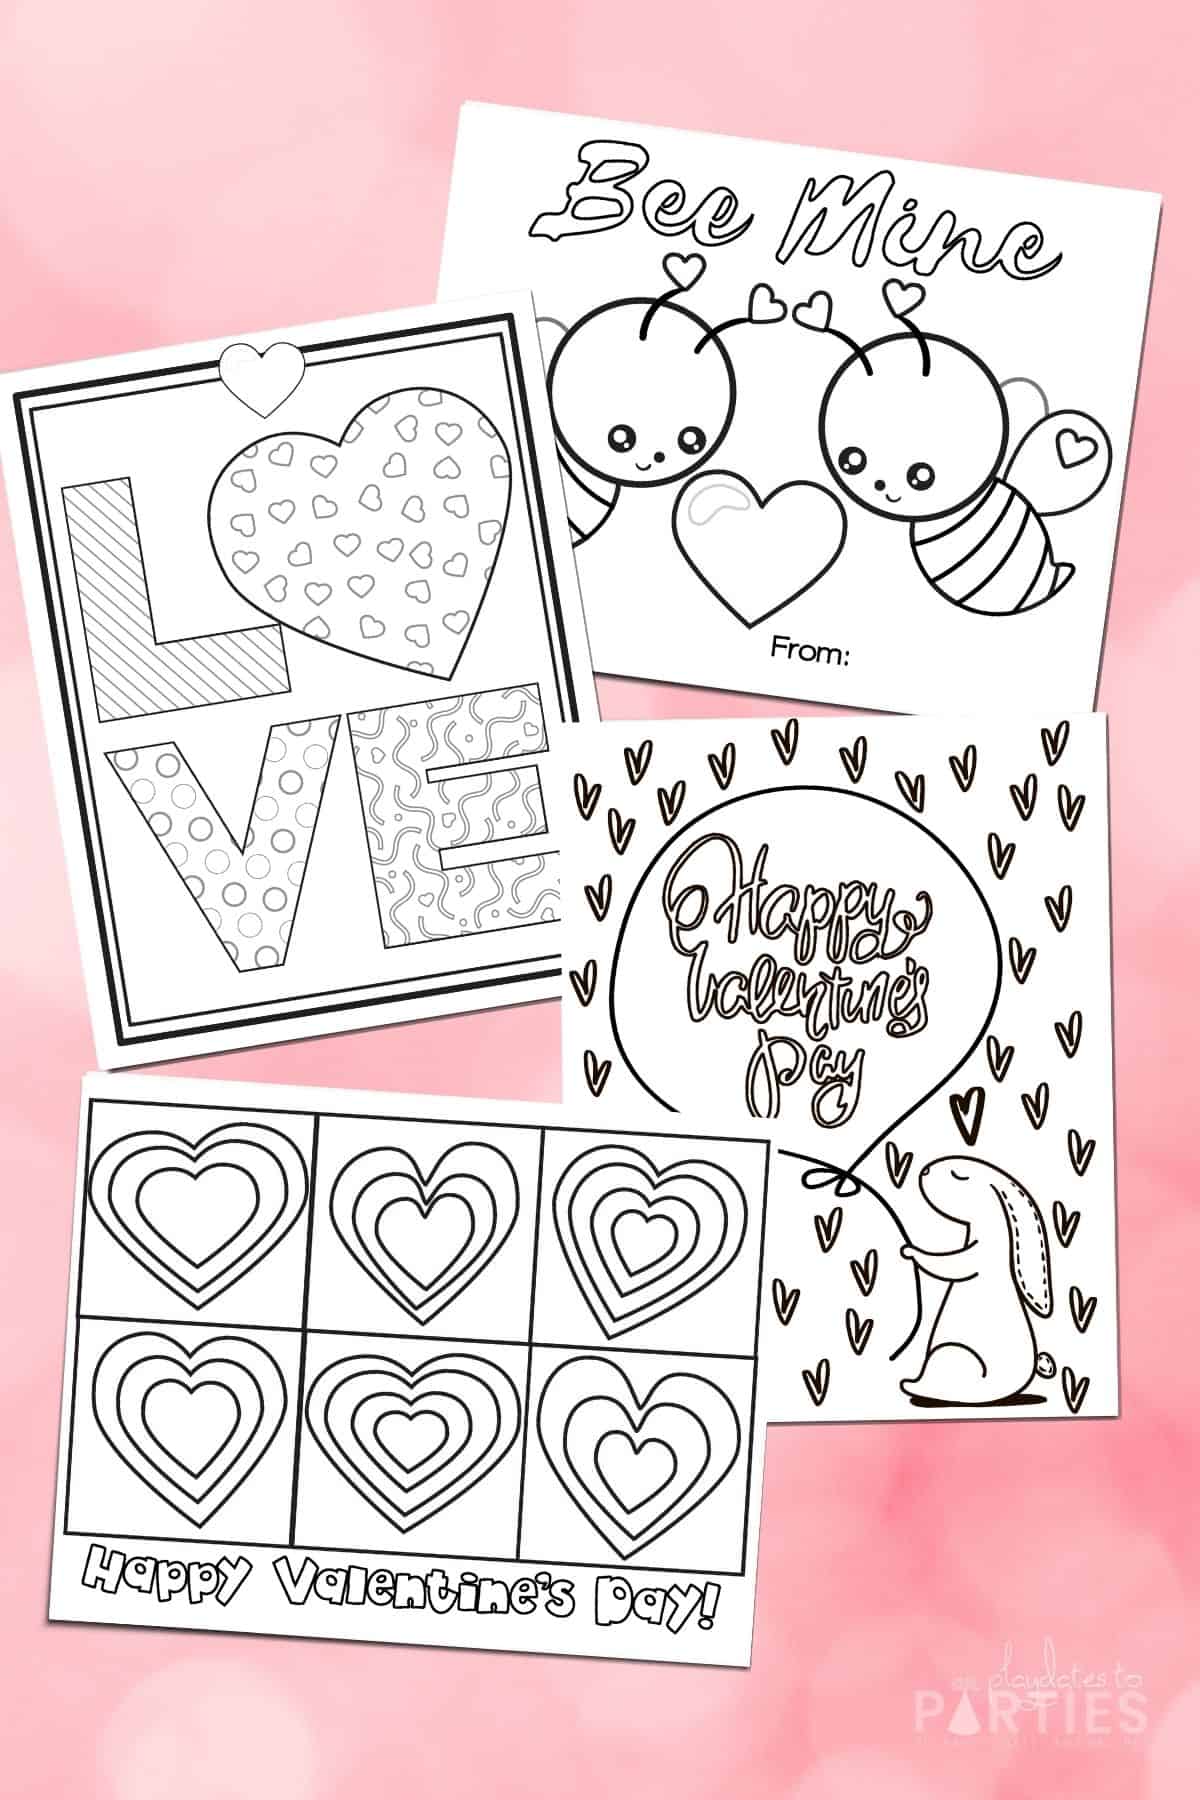 Mockup of four free Valentine's Day coloring pages printable sheets.